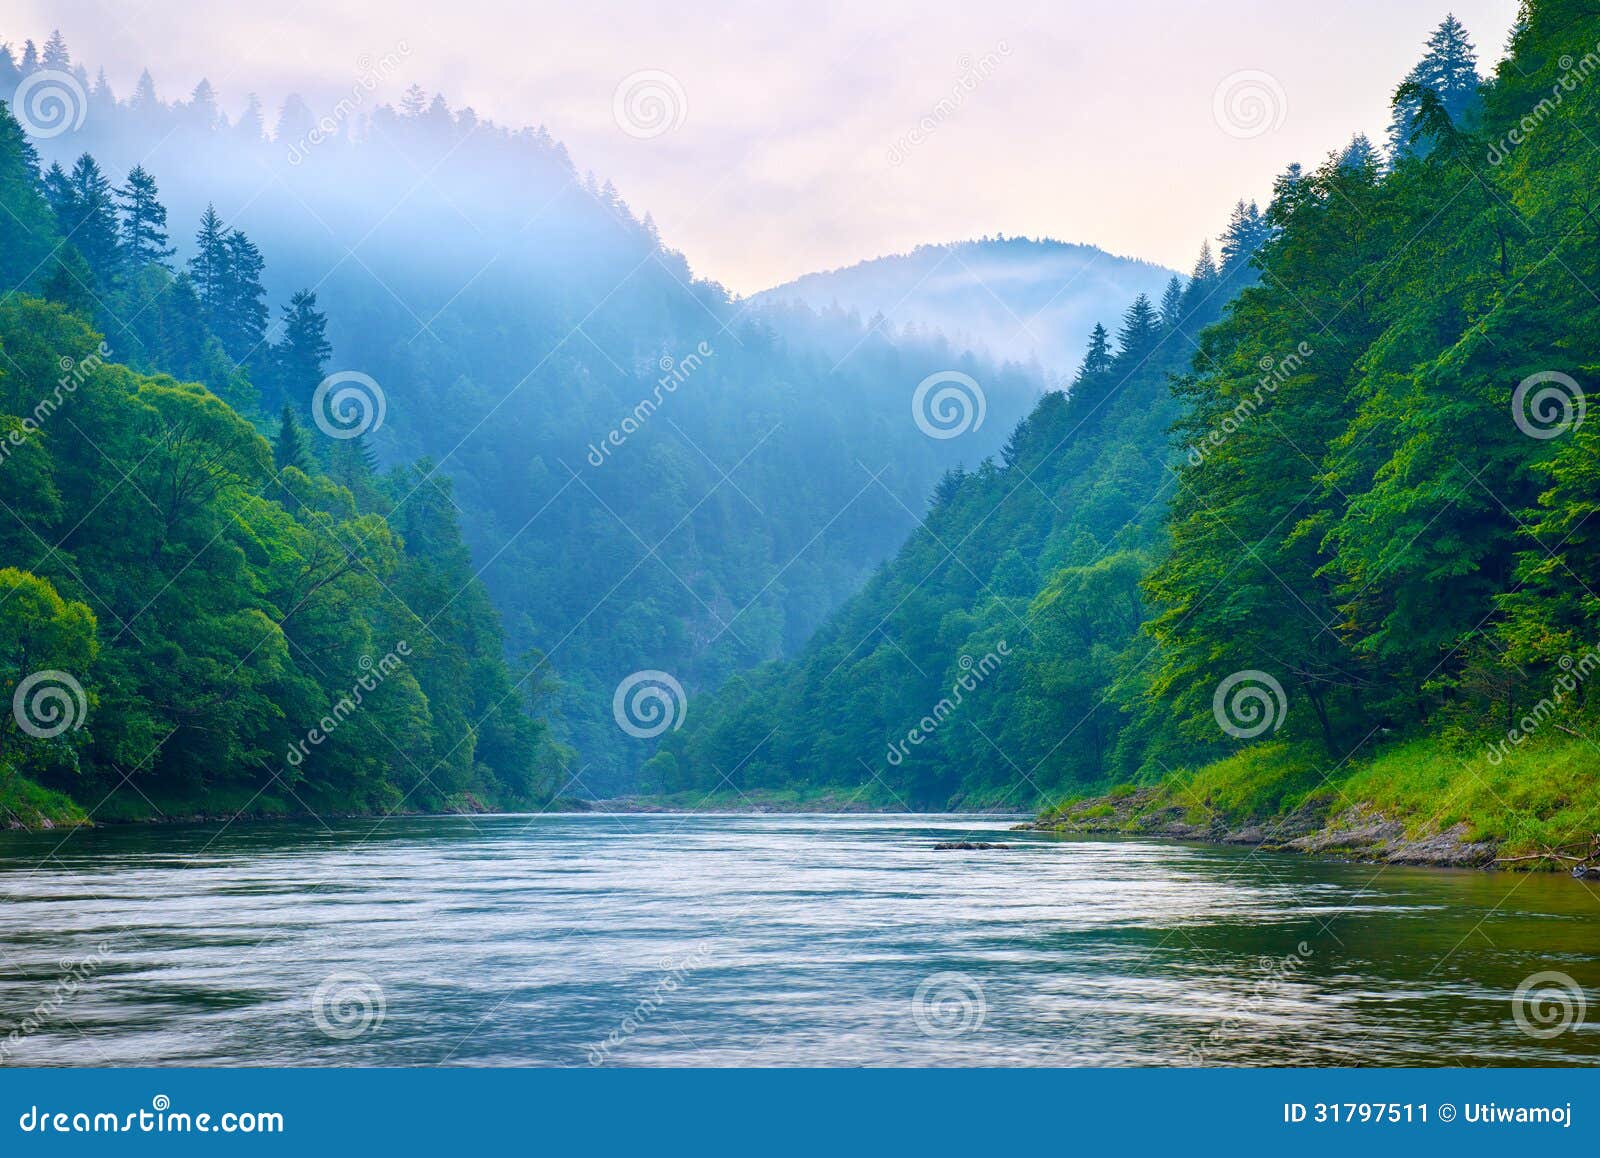 the gorge of mountain river in the morning